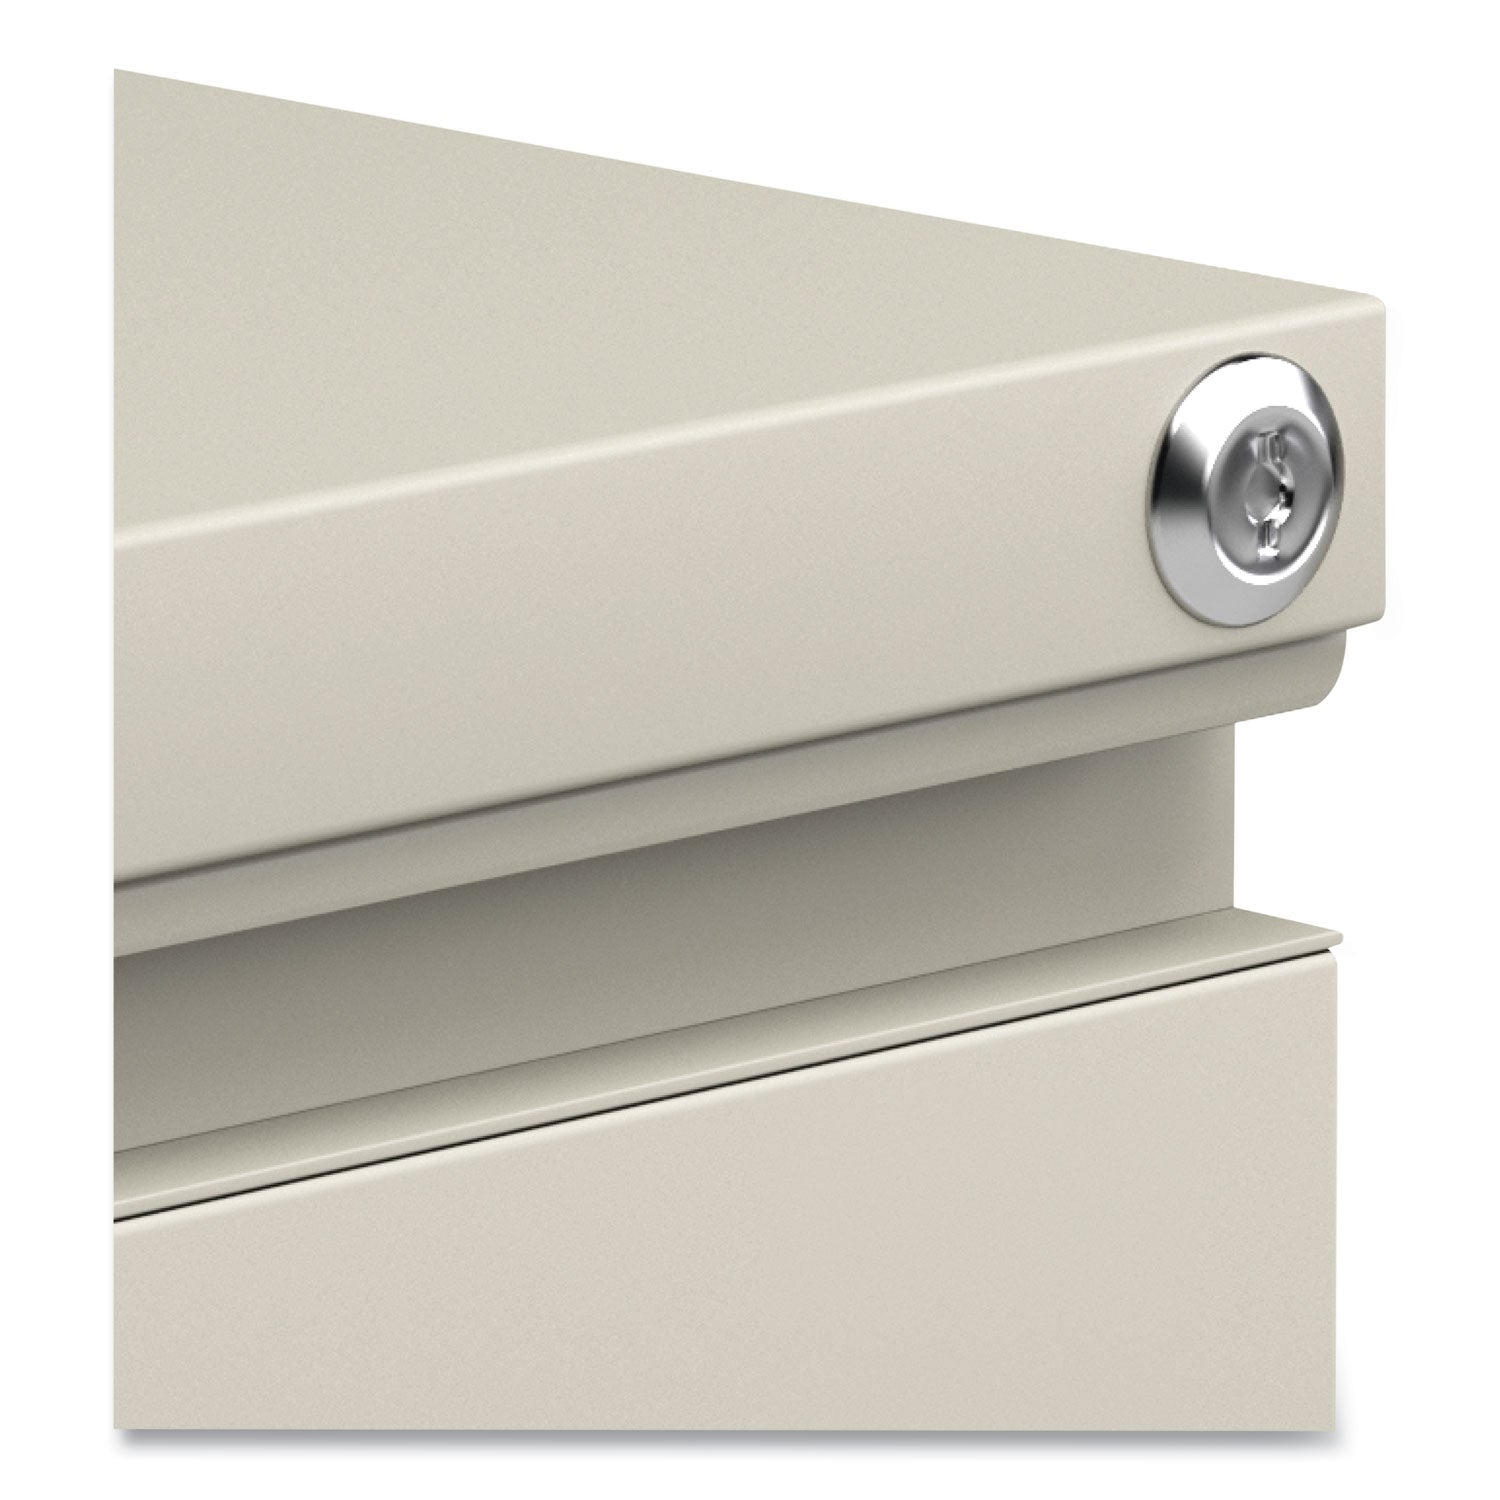 file-pedestal-with-full-length-pull-left-or-right-3-drawers-box-box-file-legal-letter-putty-1496-x-1929-x-2775_alepbbbfpy - 6